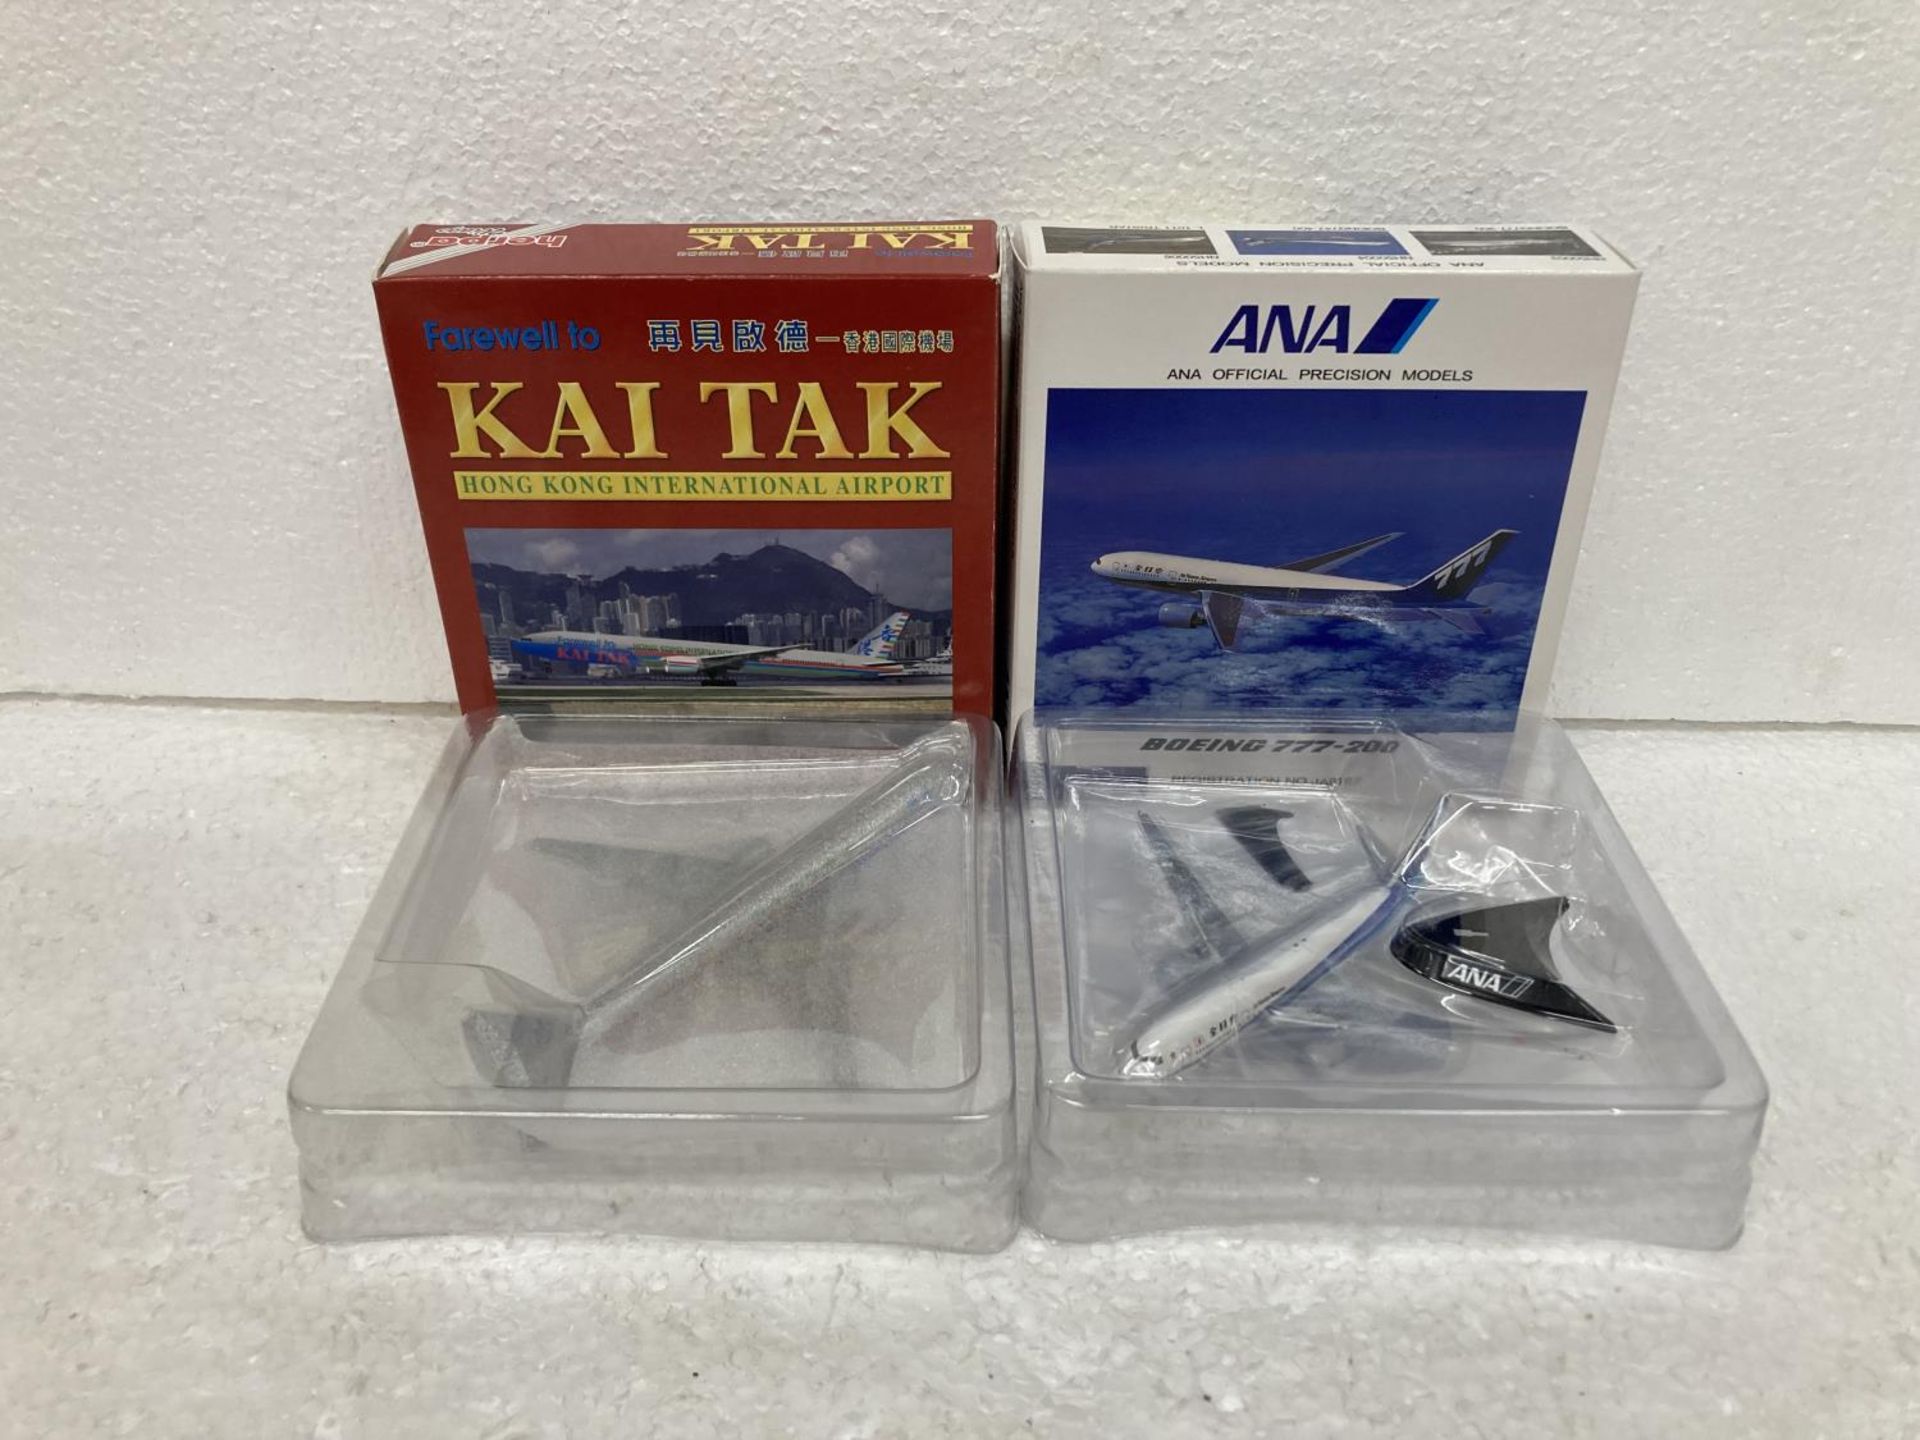 FOUR HERPA WINGS COLLECTION PLANES TO INCLUDE - GARUDA INDONESIA BOEING 747-400 MODEL 500630, - Image 3 of 3